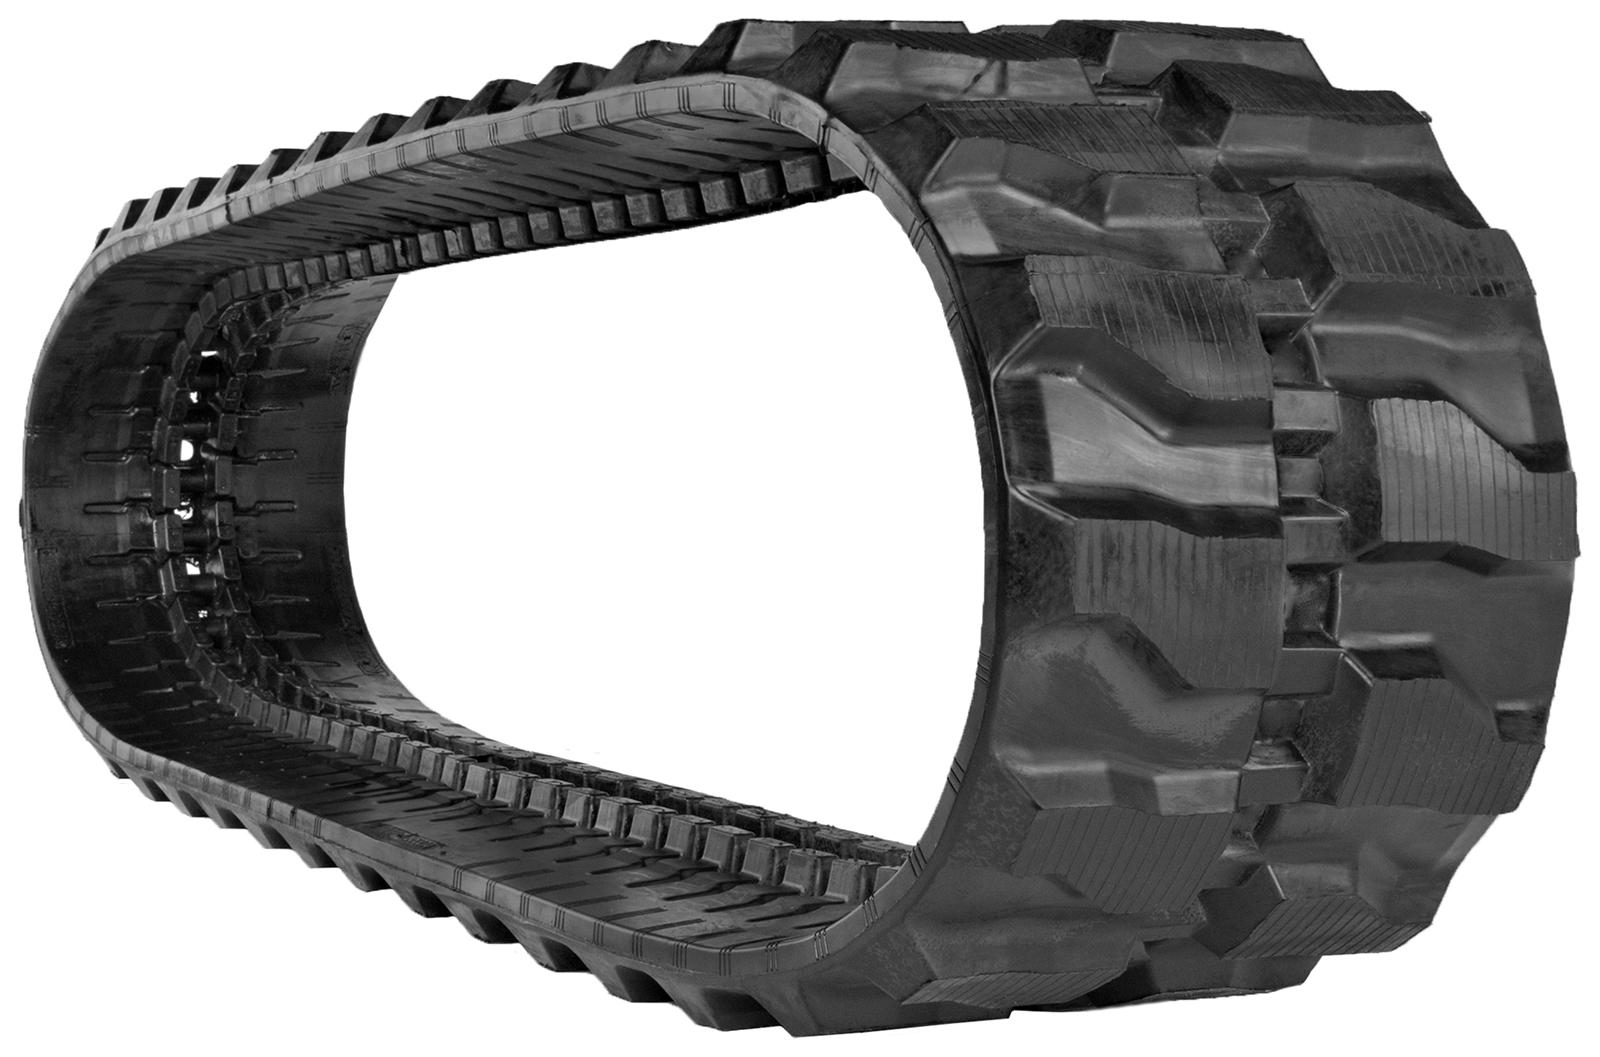 set of 2 16" heavy duty rubber track (400x72.5yx72)